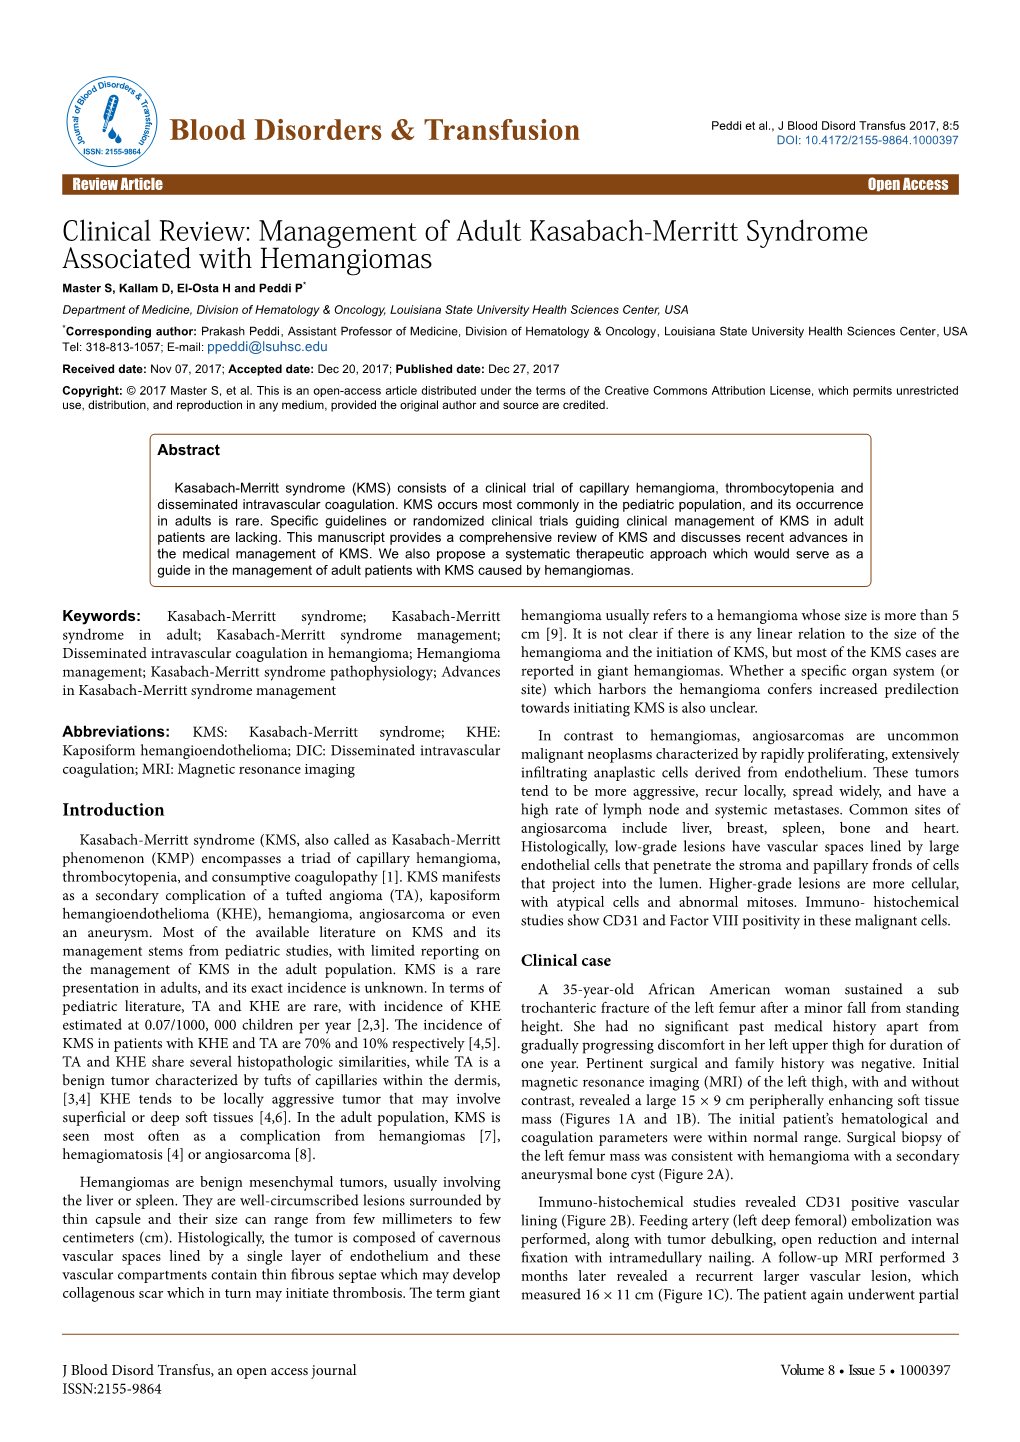 Clinical Review: Management of Adult Kasabach-Merritt Syndrome